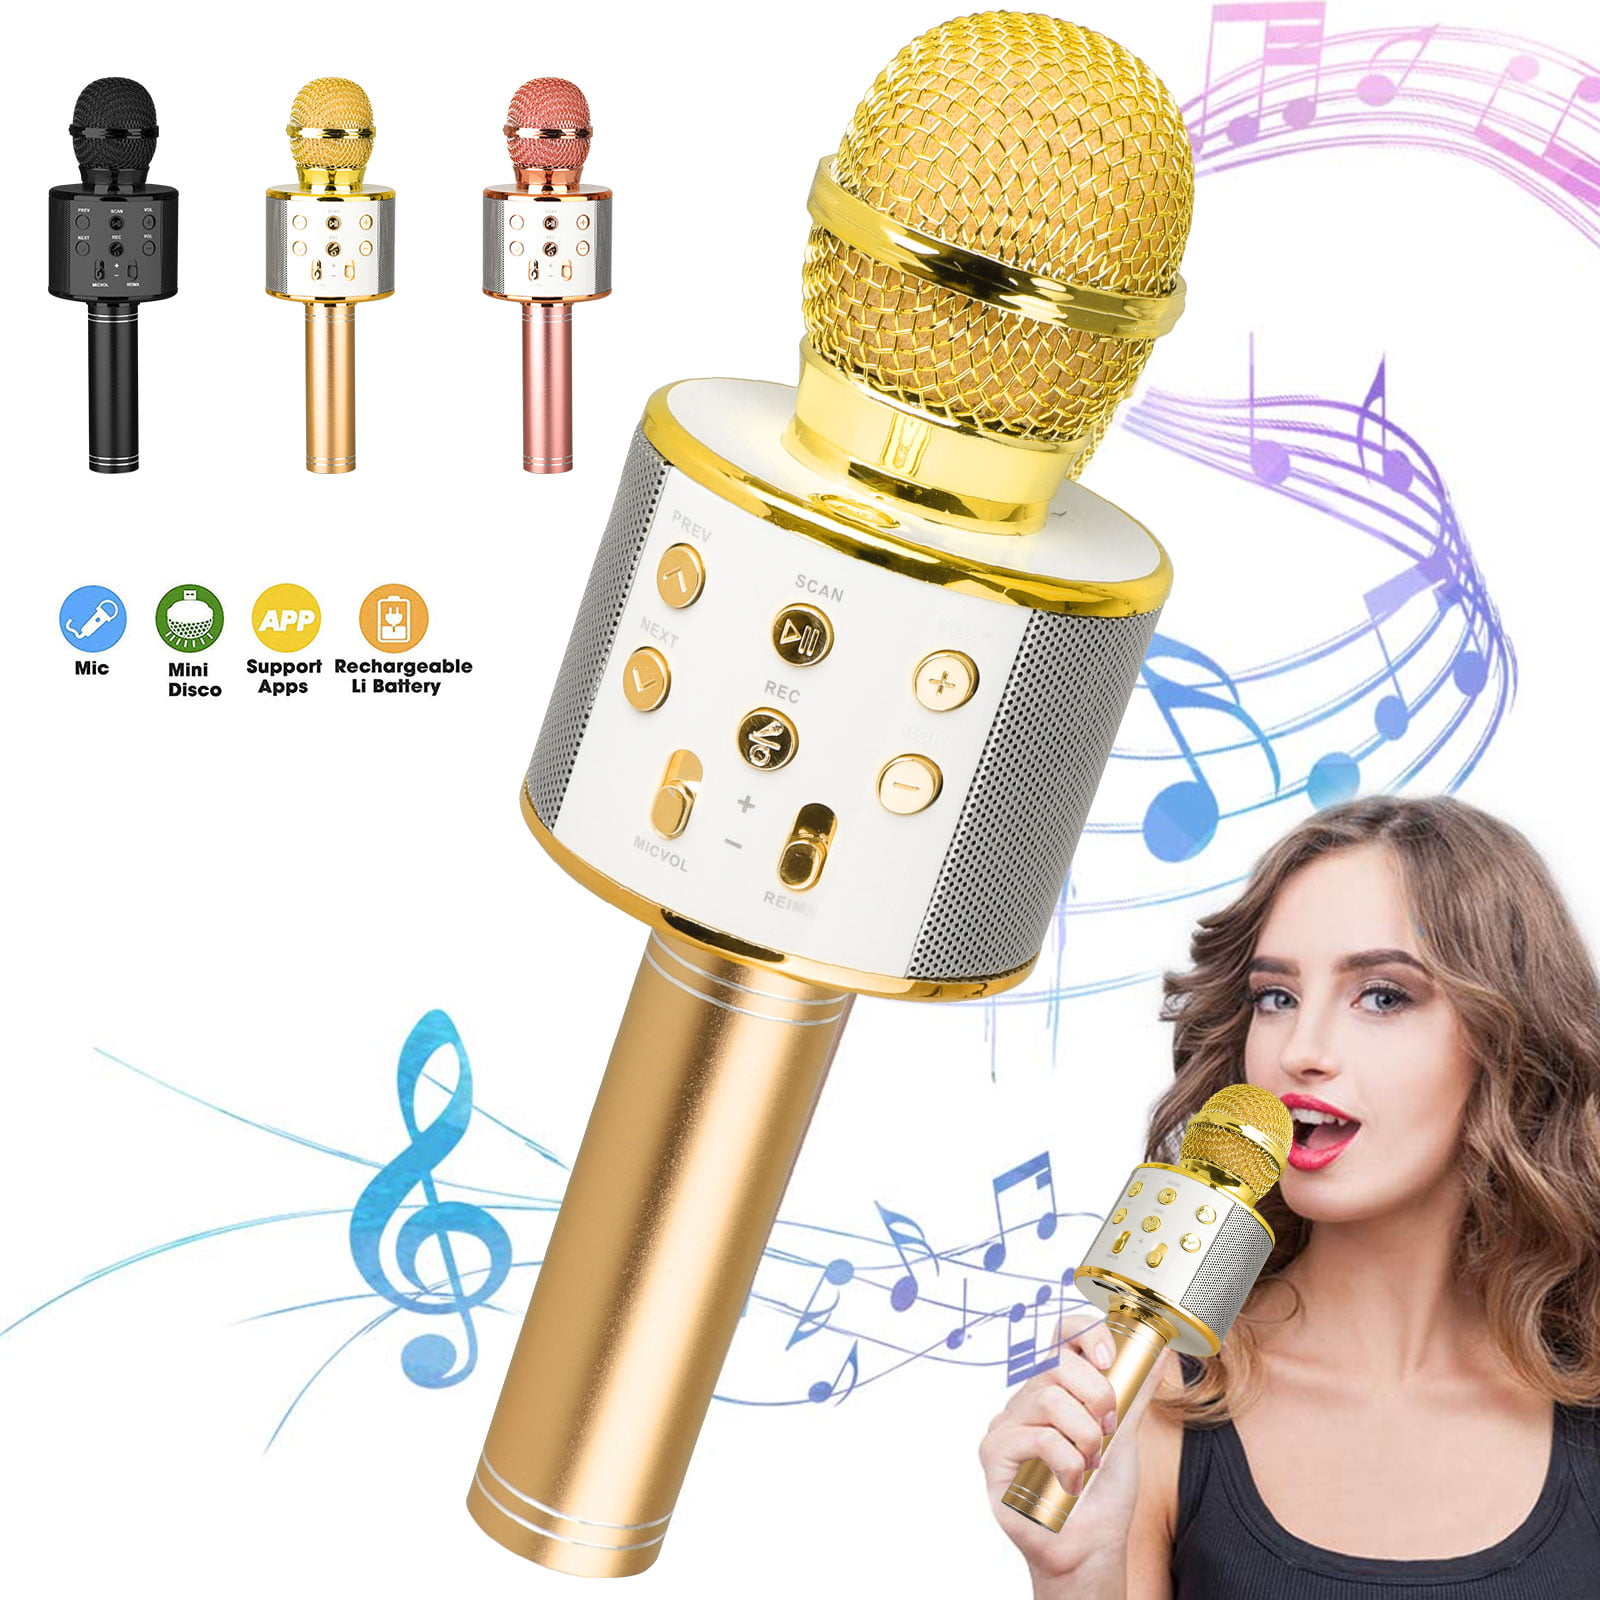 Blue SUNY Wireless Bluetooth Karaoke Microphone Portable Handheld Karaoke Mic Speaker Creative Gift for Kids Adults Birthday Home Party KTV Compatible with iPhone/Android/iPad/PC/All Smartphone 